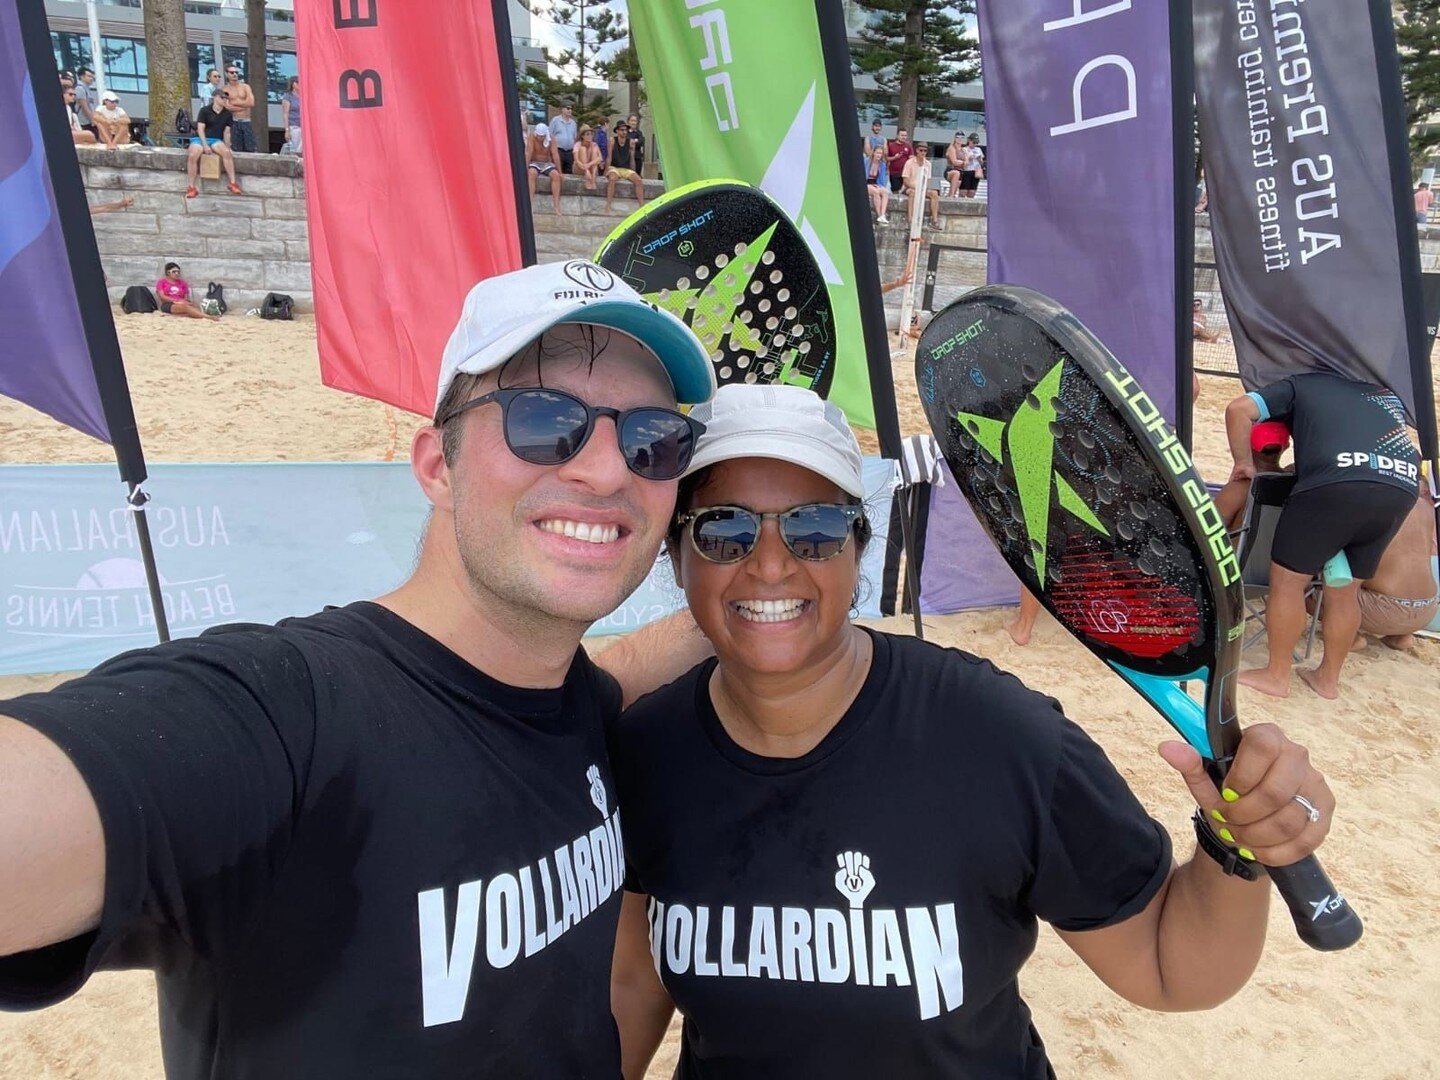 🎾🏆 Teamwork makes the dream work! Our Vollardian champs just aced the Beach Tennis Championship at Manly Beach! 🌊🌞 (by making the quarter finals in the Mixed Doubles Beginners comp haha)

Congrats to our beach tennis stars! 🌟🏅 #TeamVollardian #